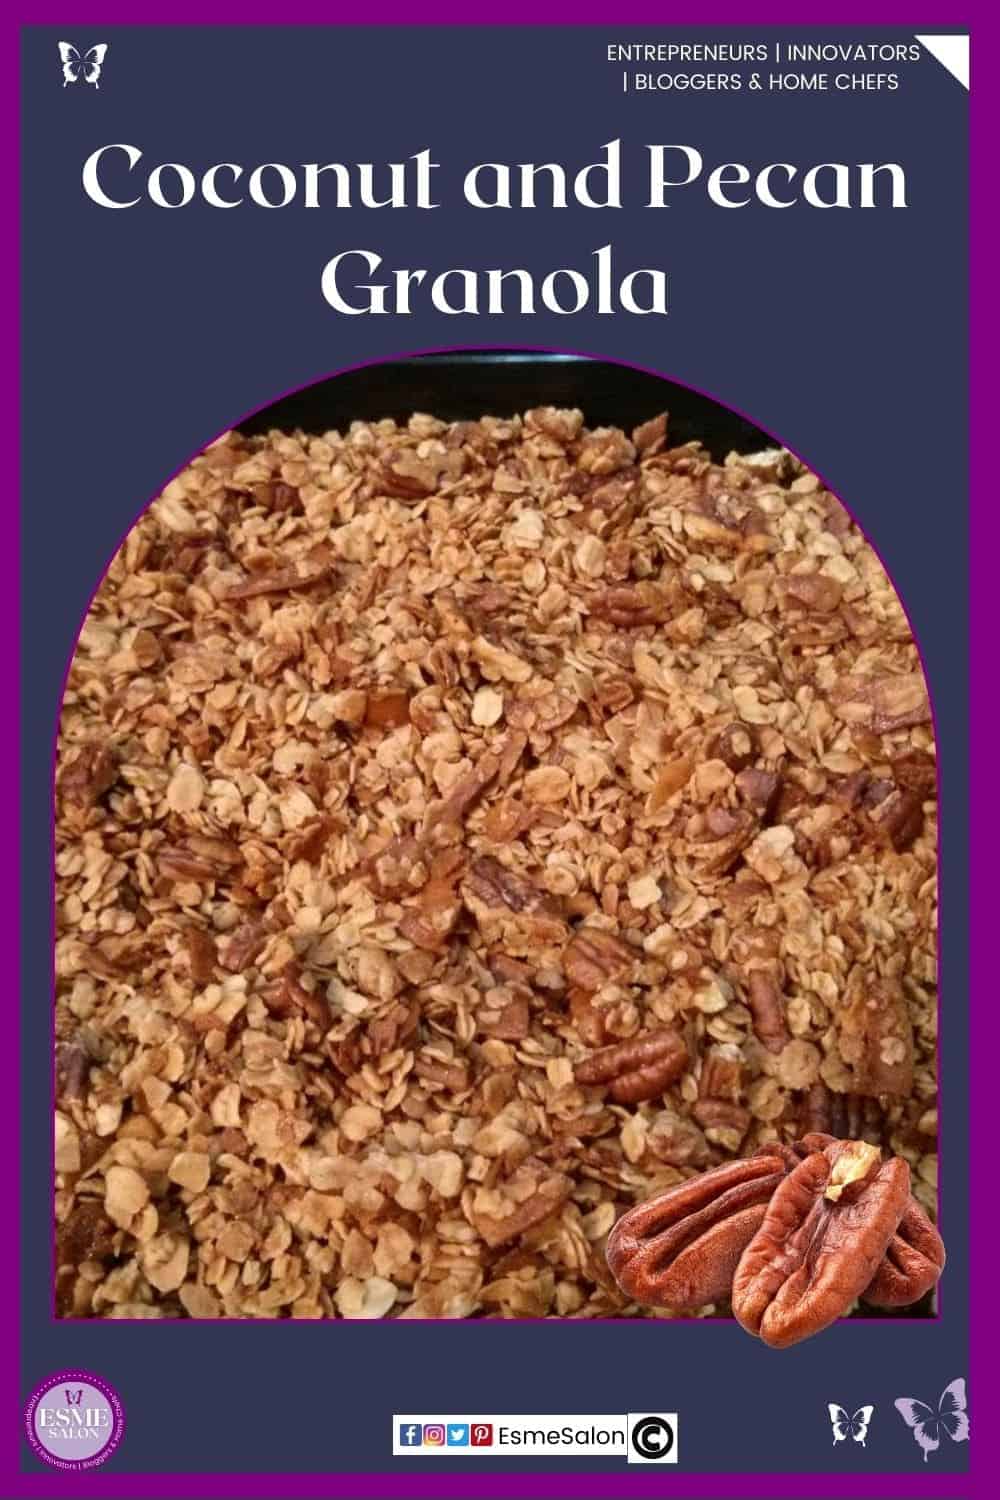 an image of a baking tray filled with Coconut and Pecan Granola and cracked pecans on the side